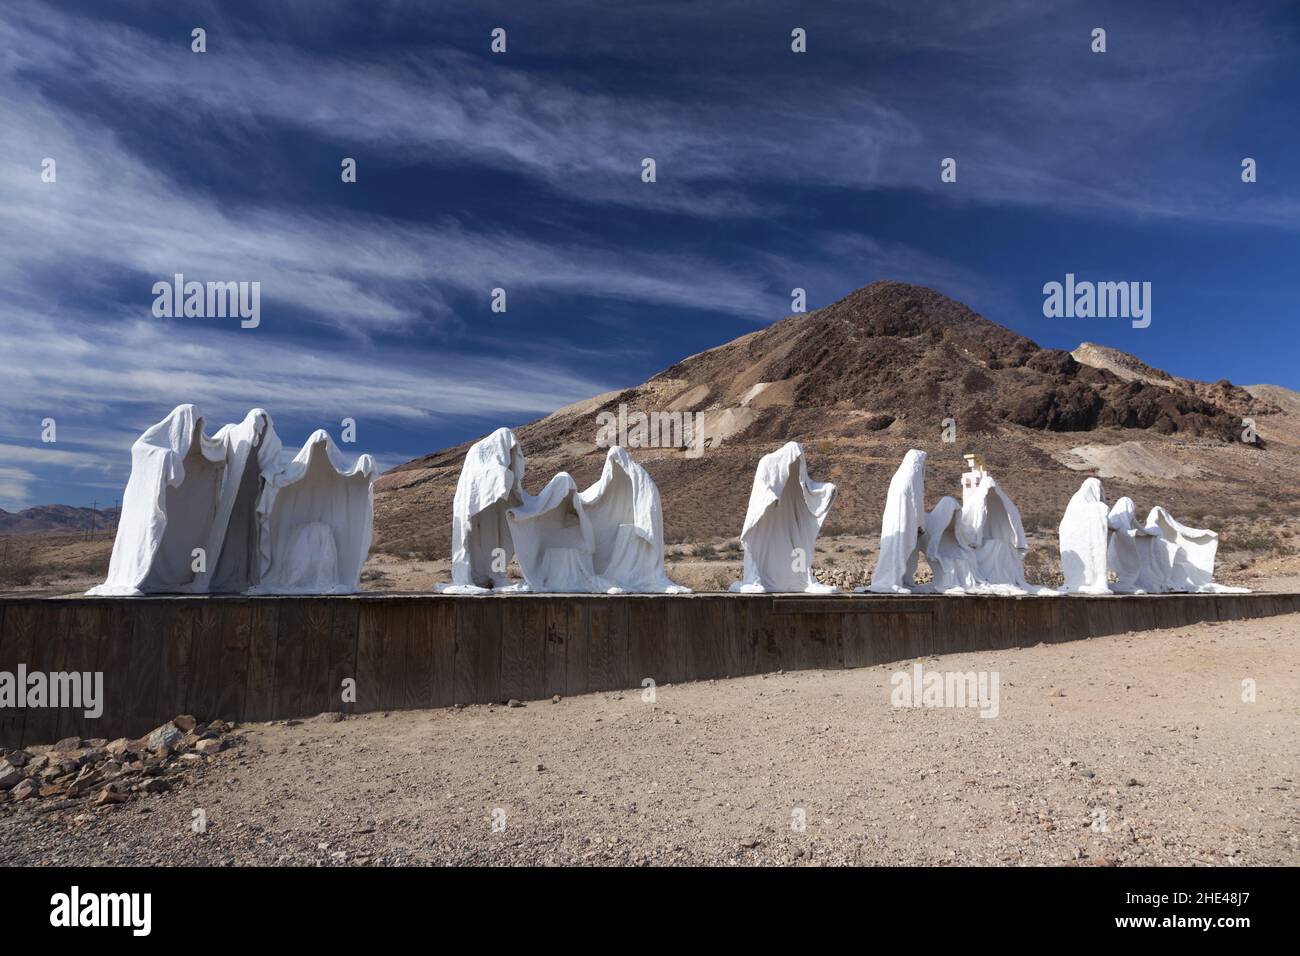 The Last Supper, Row of White Ghost Town Sculptures. Public Art by Belgian sculptor Albert Szukalski in Goldwell Open Air Museum Rhyolite Nevada Stock Photo